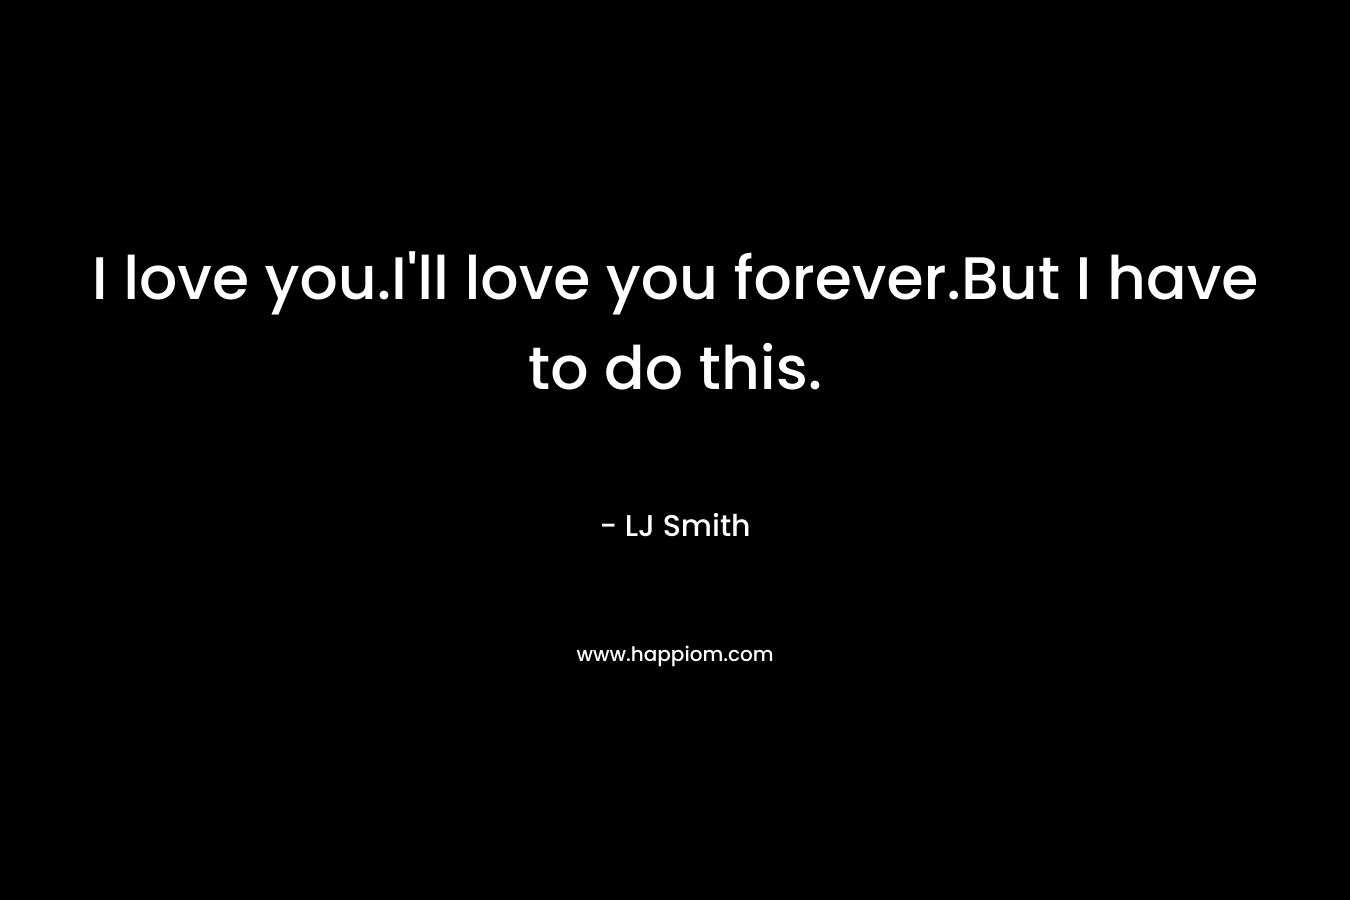 I love you.I’ll love you forever.But I have to do this. – LJ Smith